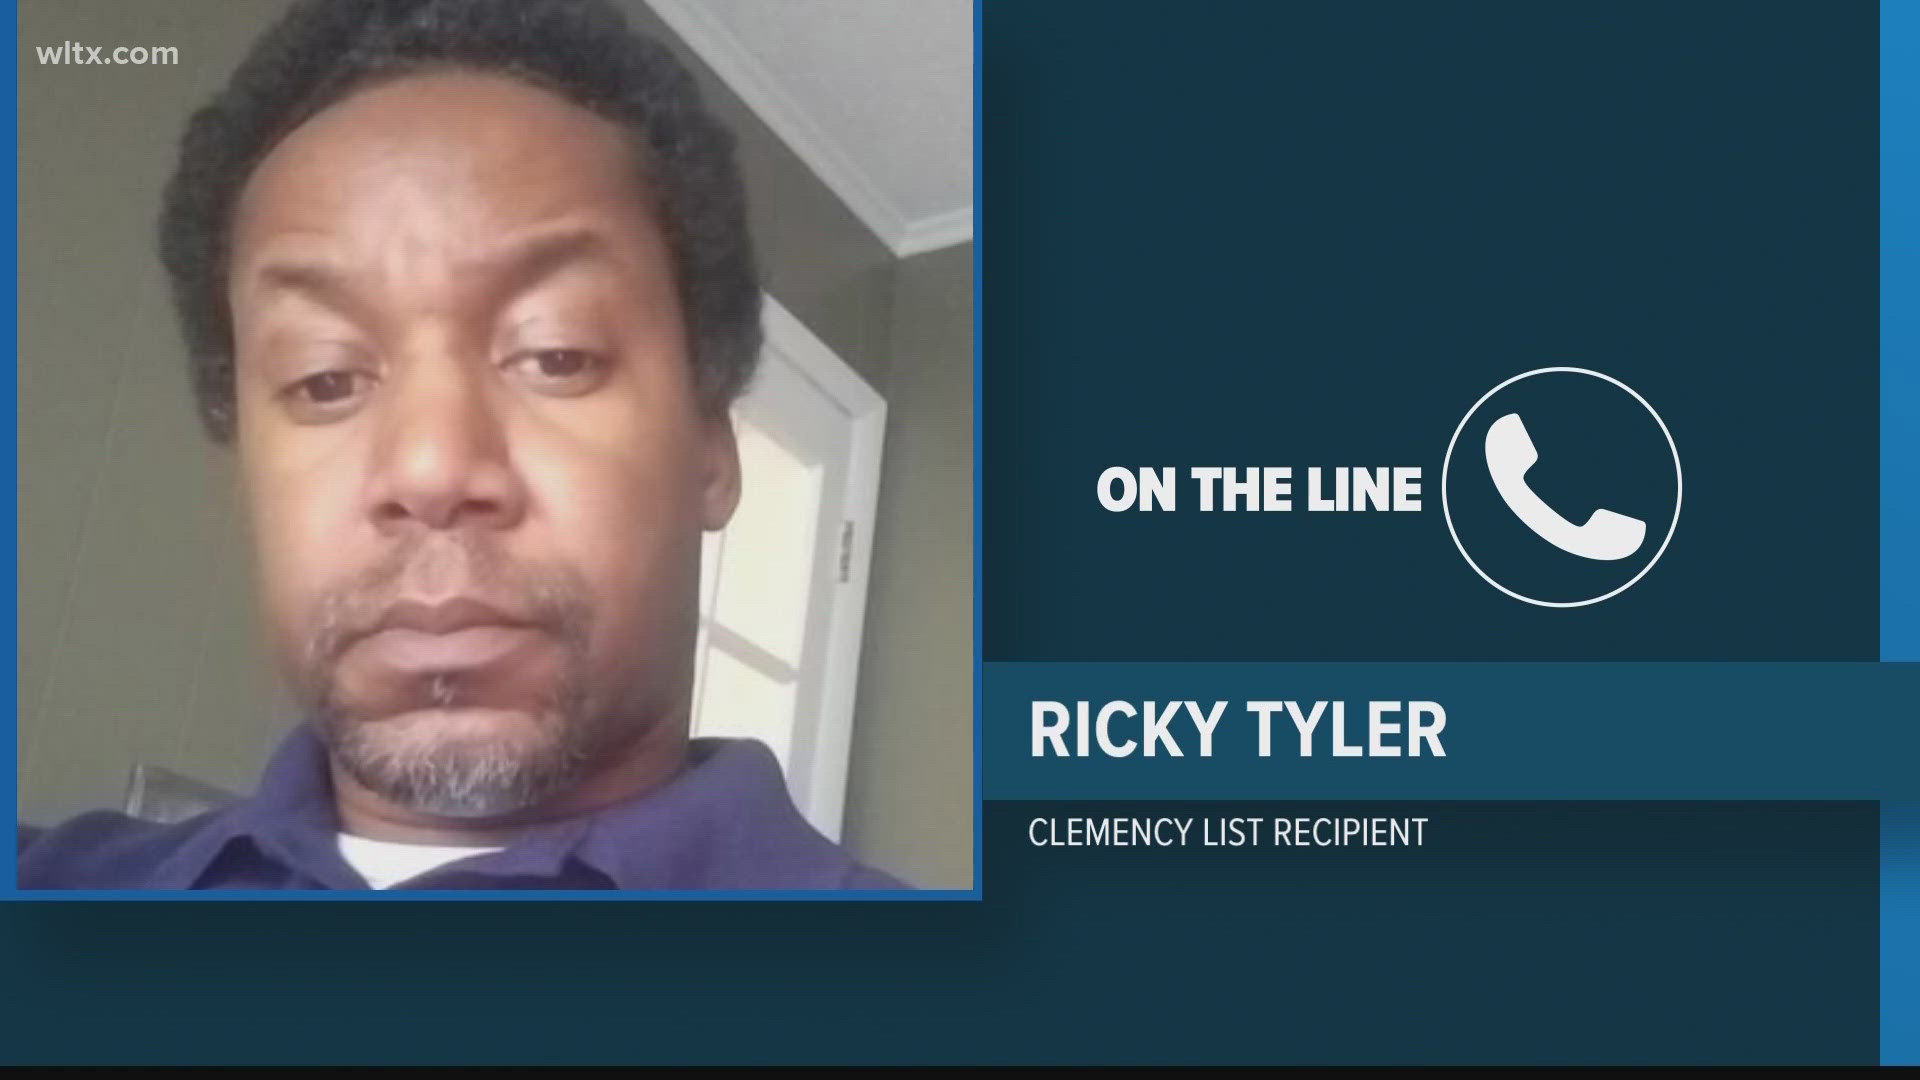 Ricky Tyler was 26 when he went to prison, he spent 11 years behind bars convicted of conspiracy to sell cocaine.